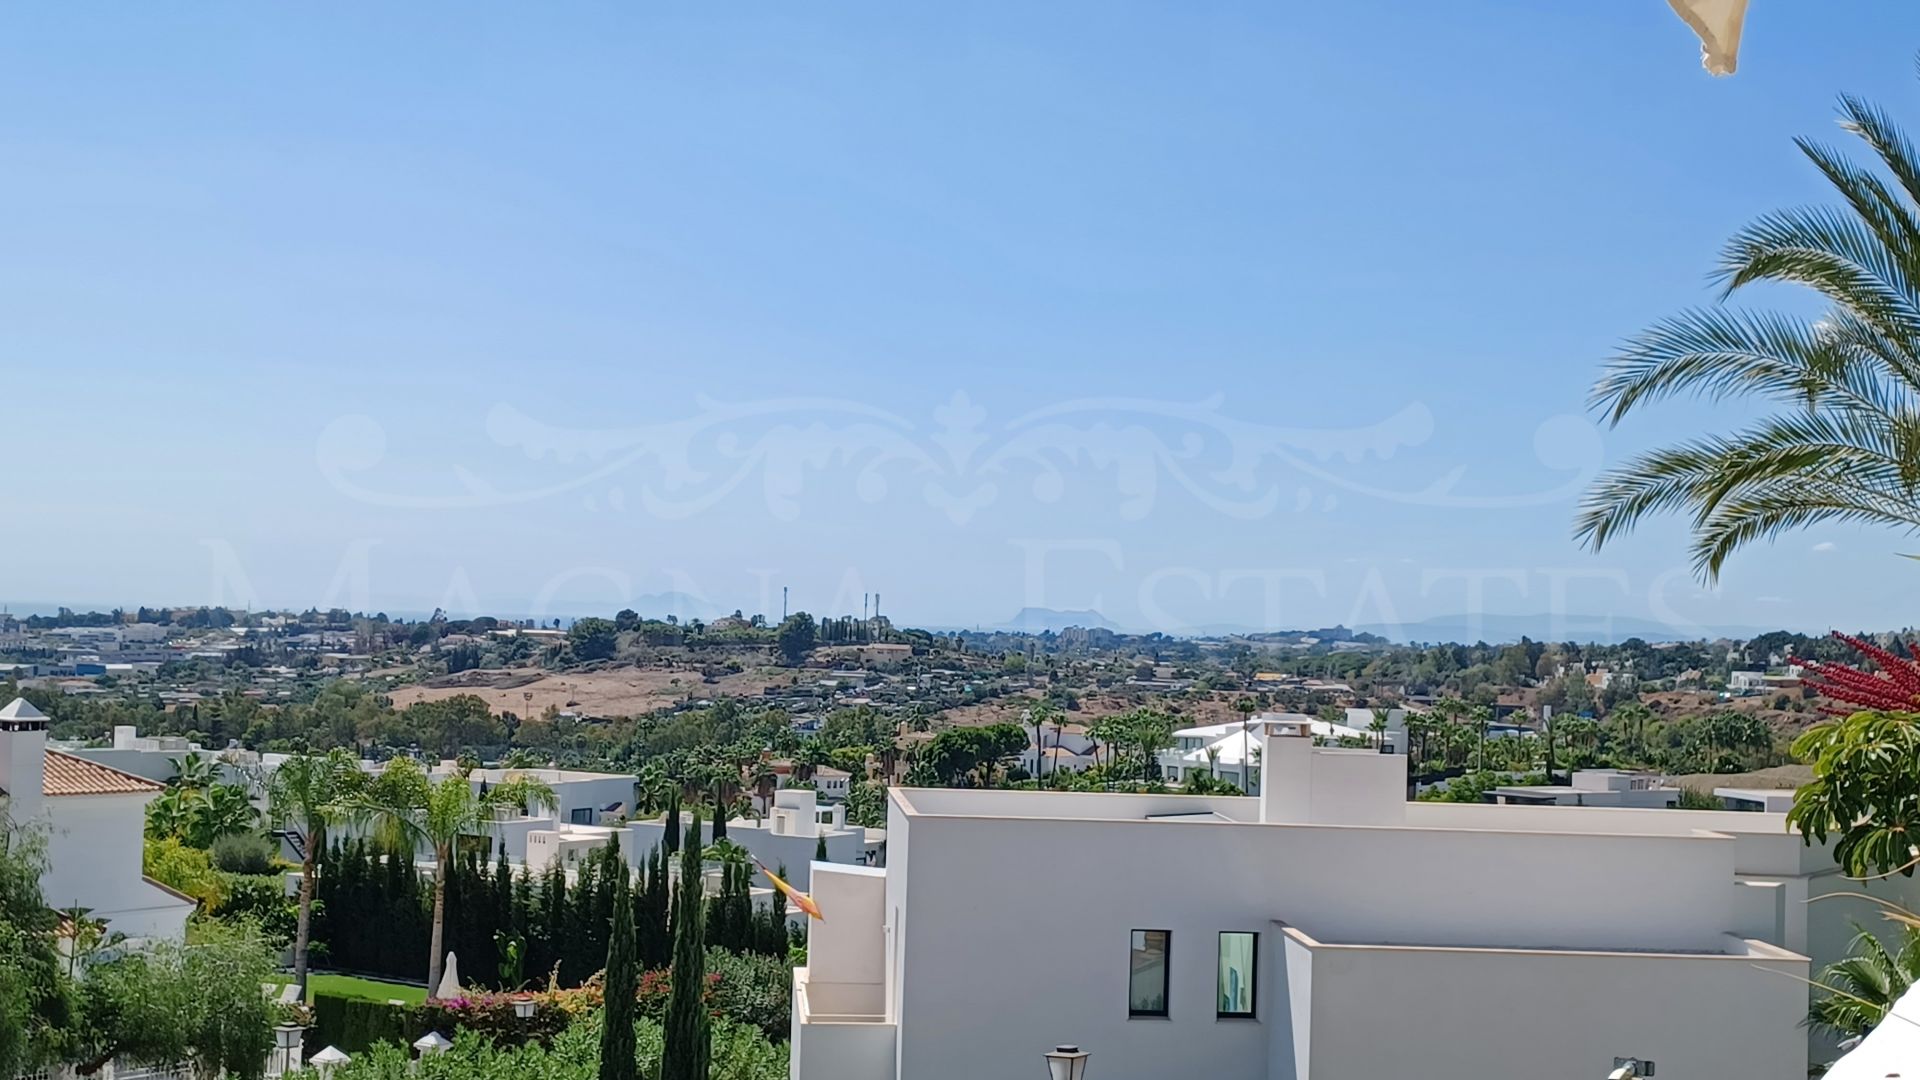 Fully renovated duplex penthouse with sea views in Nueva Andalucía, Marbella